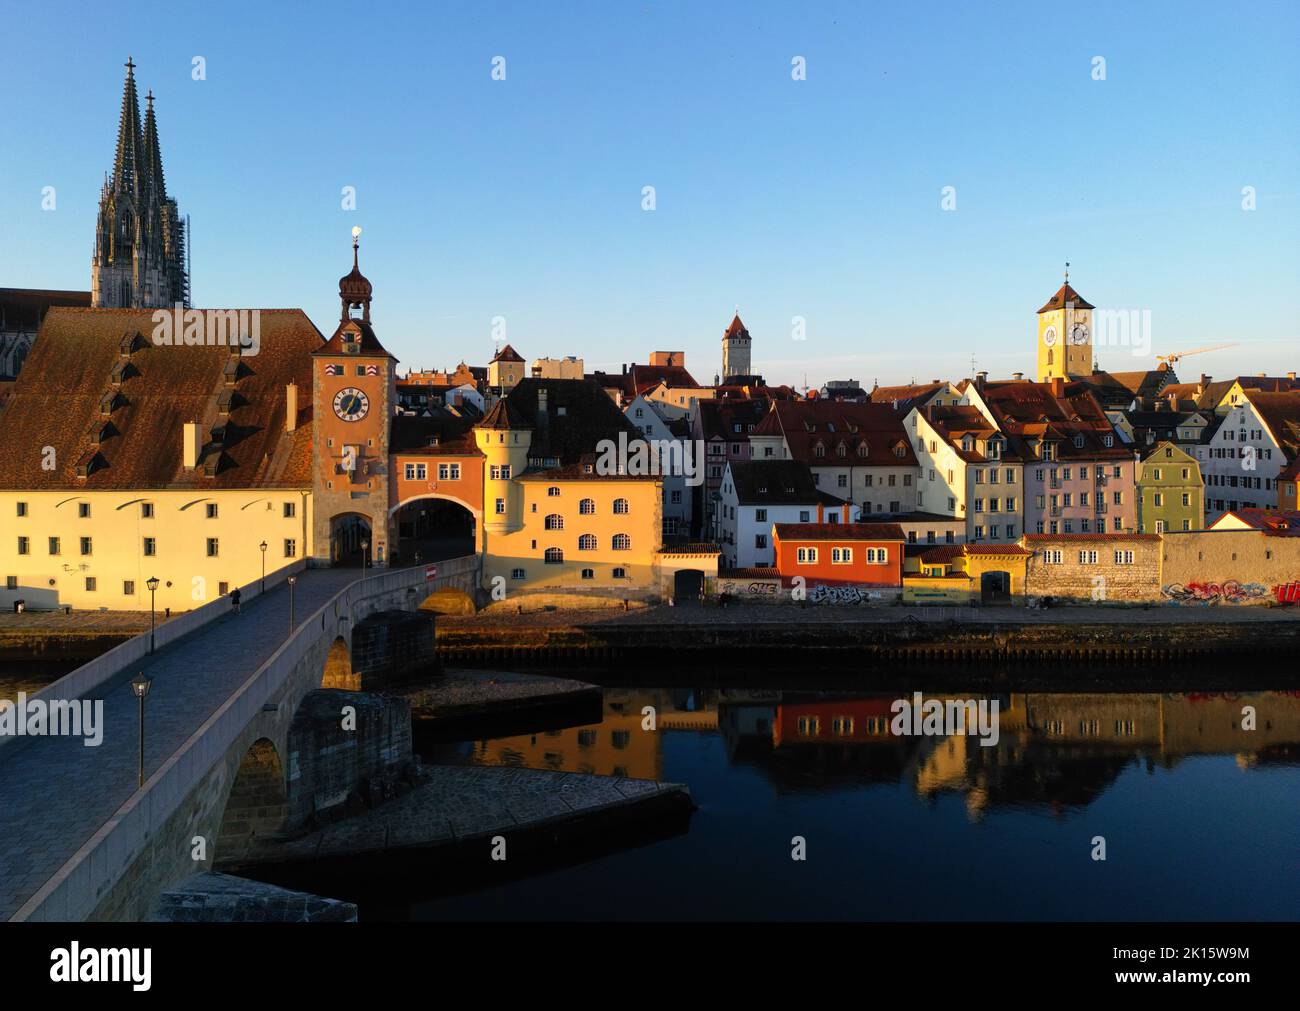 Regensburg, Germany. Drone aerial shot of the river bank with the old stone bridge, main cathedral, town hall, and other buildings of the old city Stock Photo